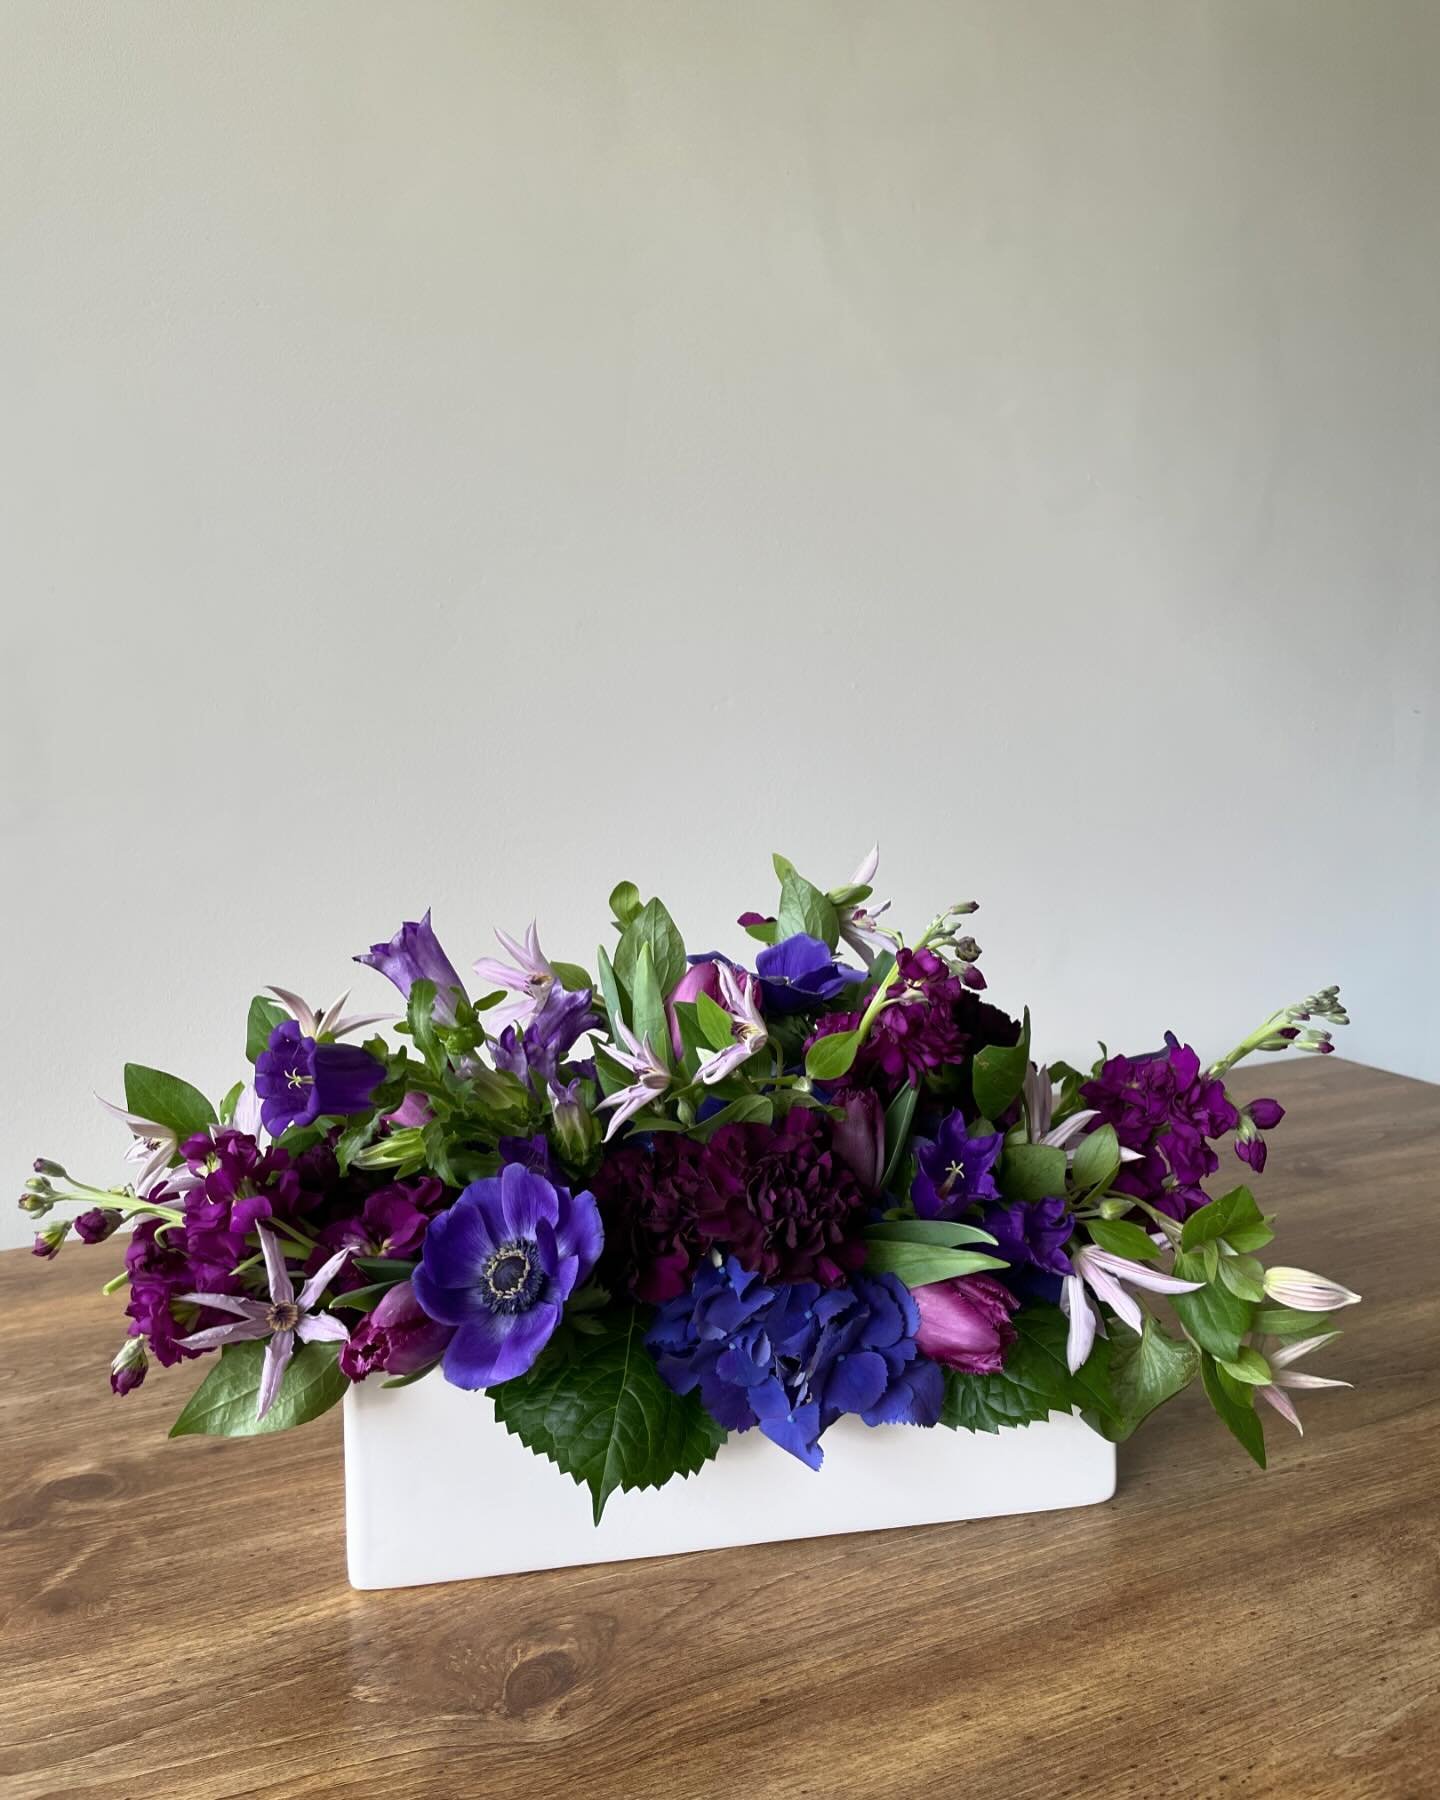 We love working with @northwesternu and @kelloggschool !  And sometimes, like today, the request is for centerpieces with all purple flowers, and @amyesquibel designed the arrangements with a beautiful purple palette ! 💜